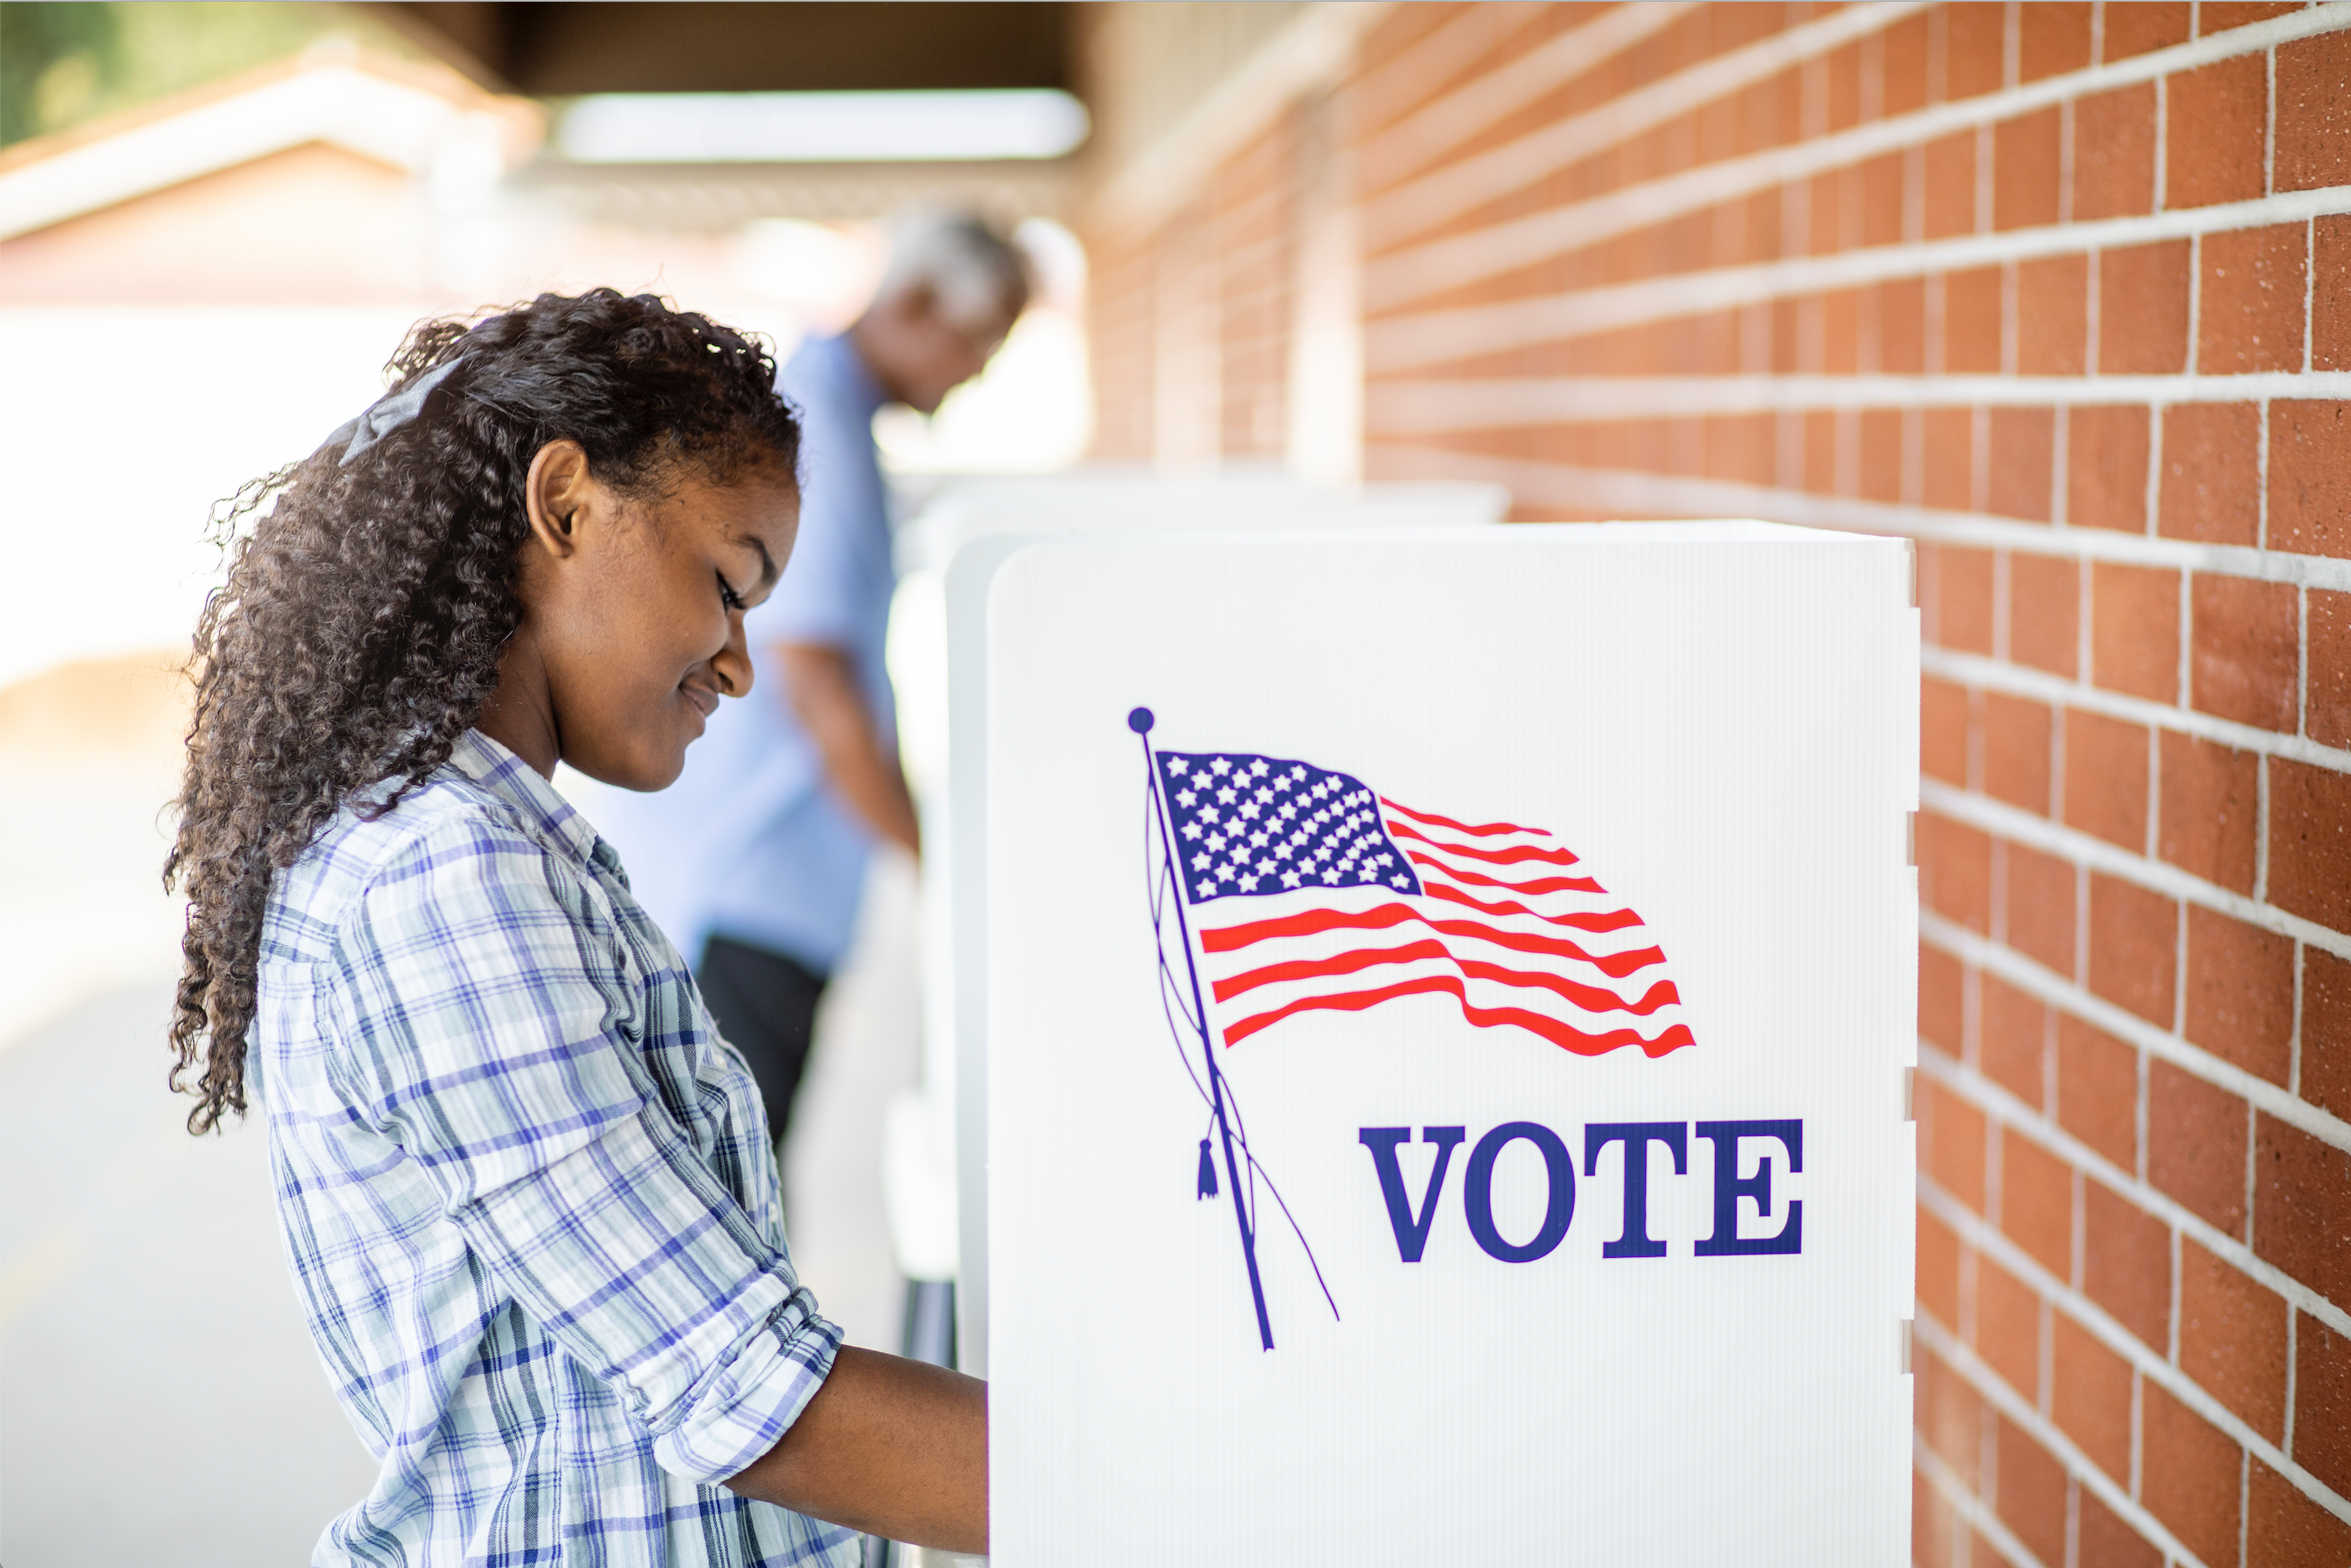 Florida should make it easier for college students to vote